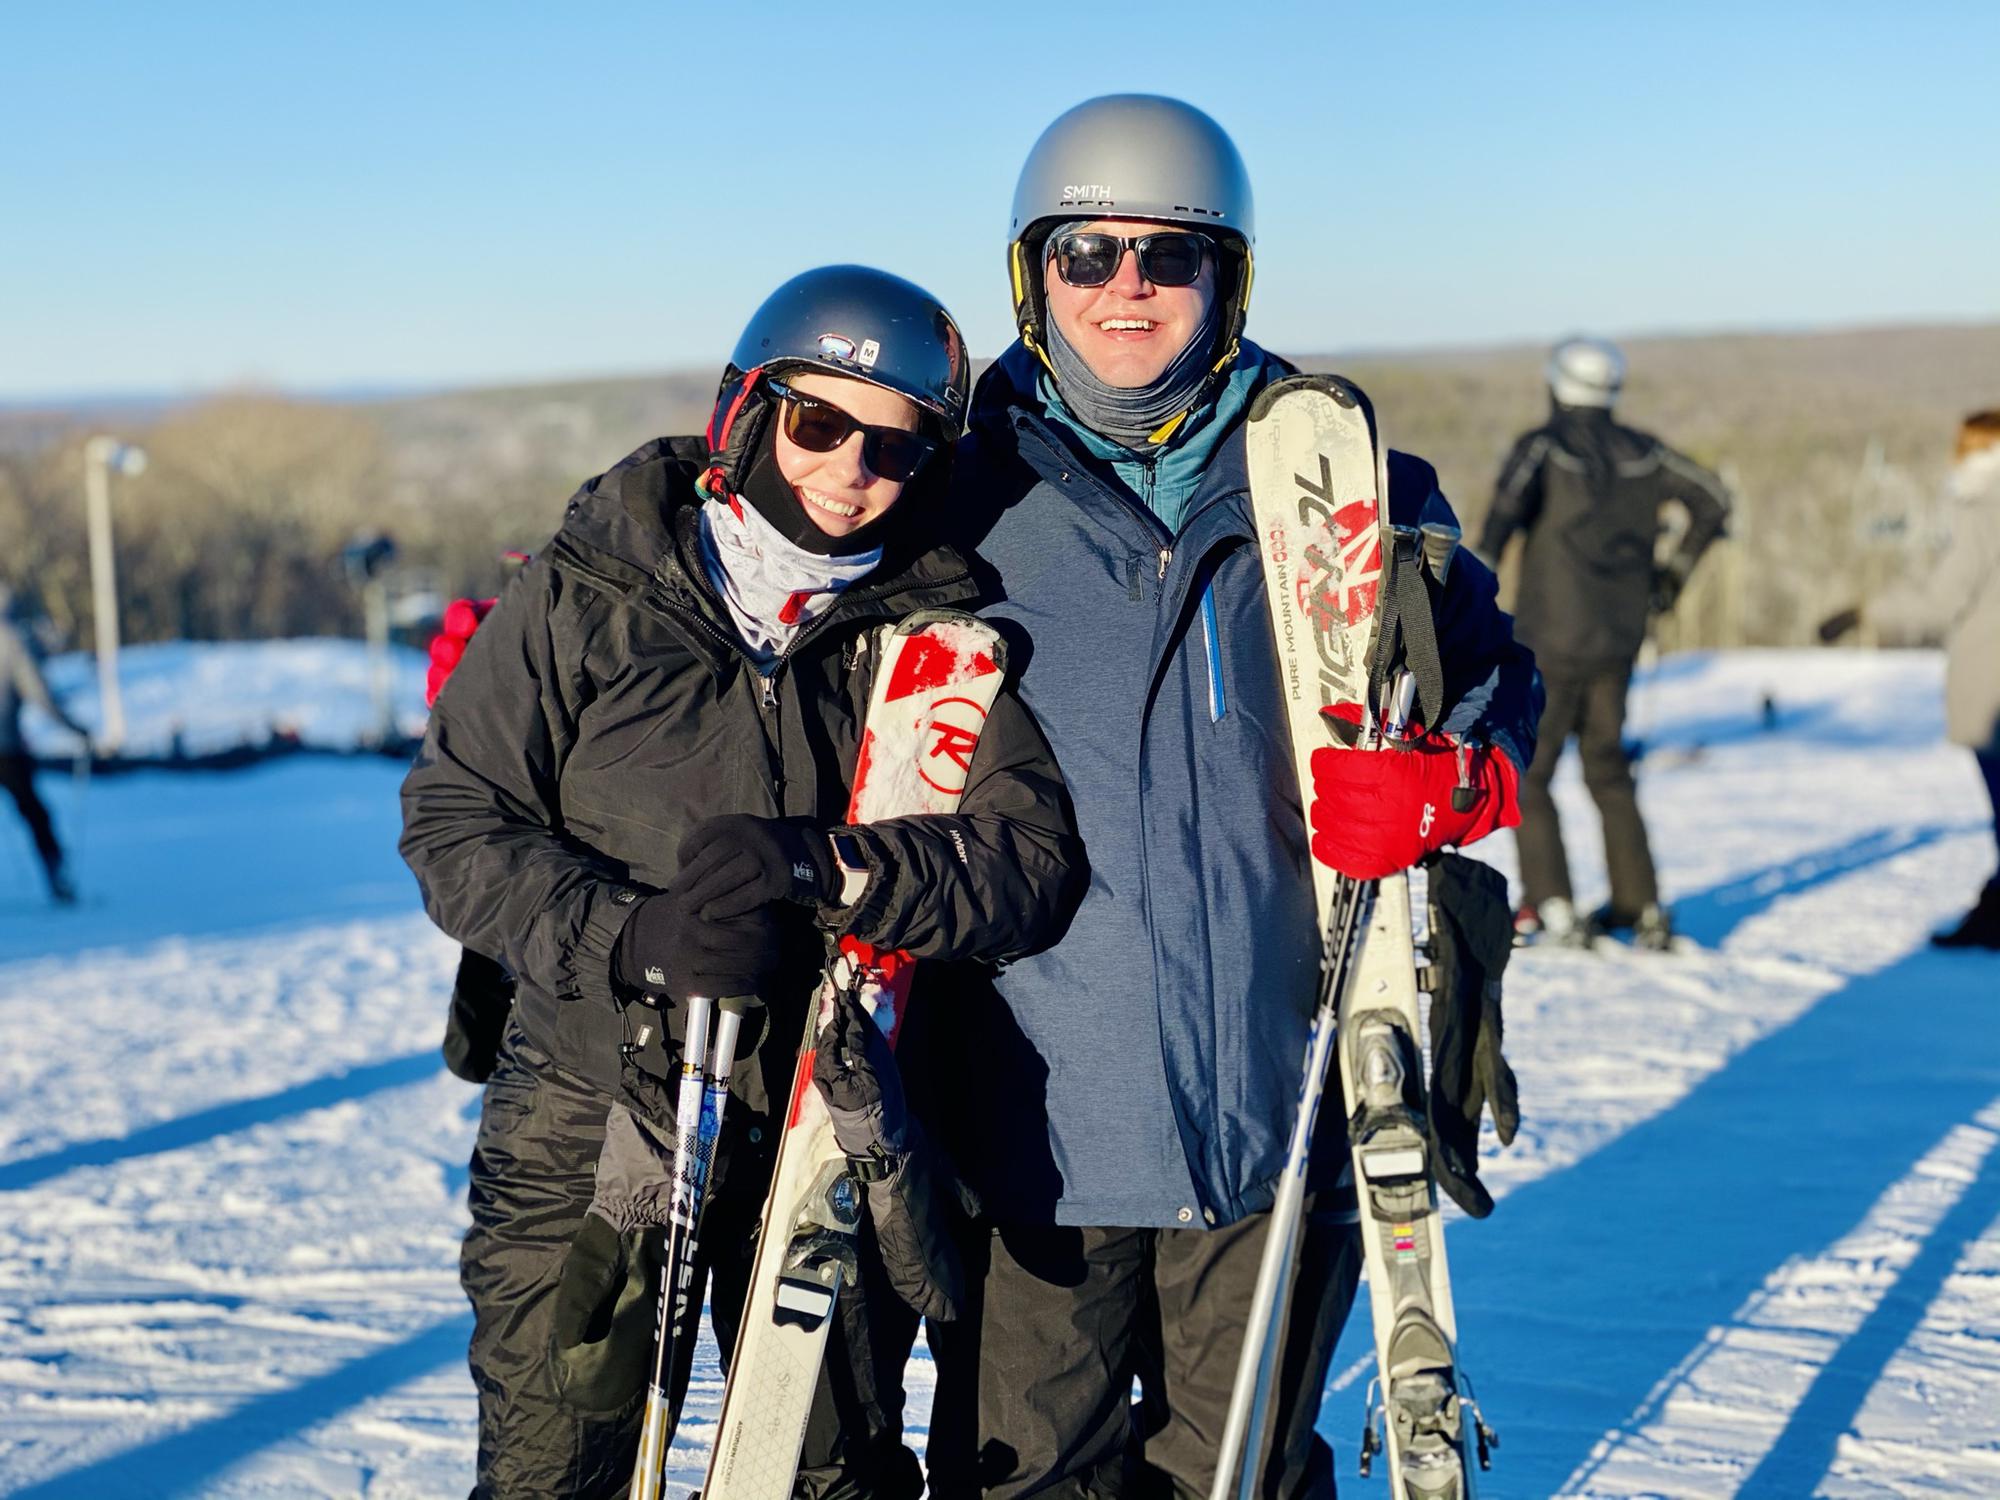 Sean’s first time skiing in the Poconos, February 2021.